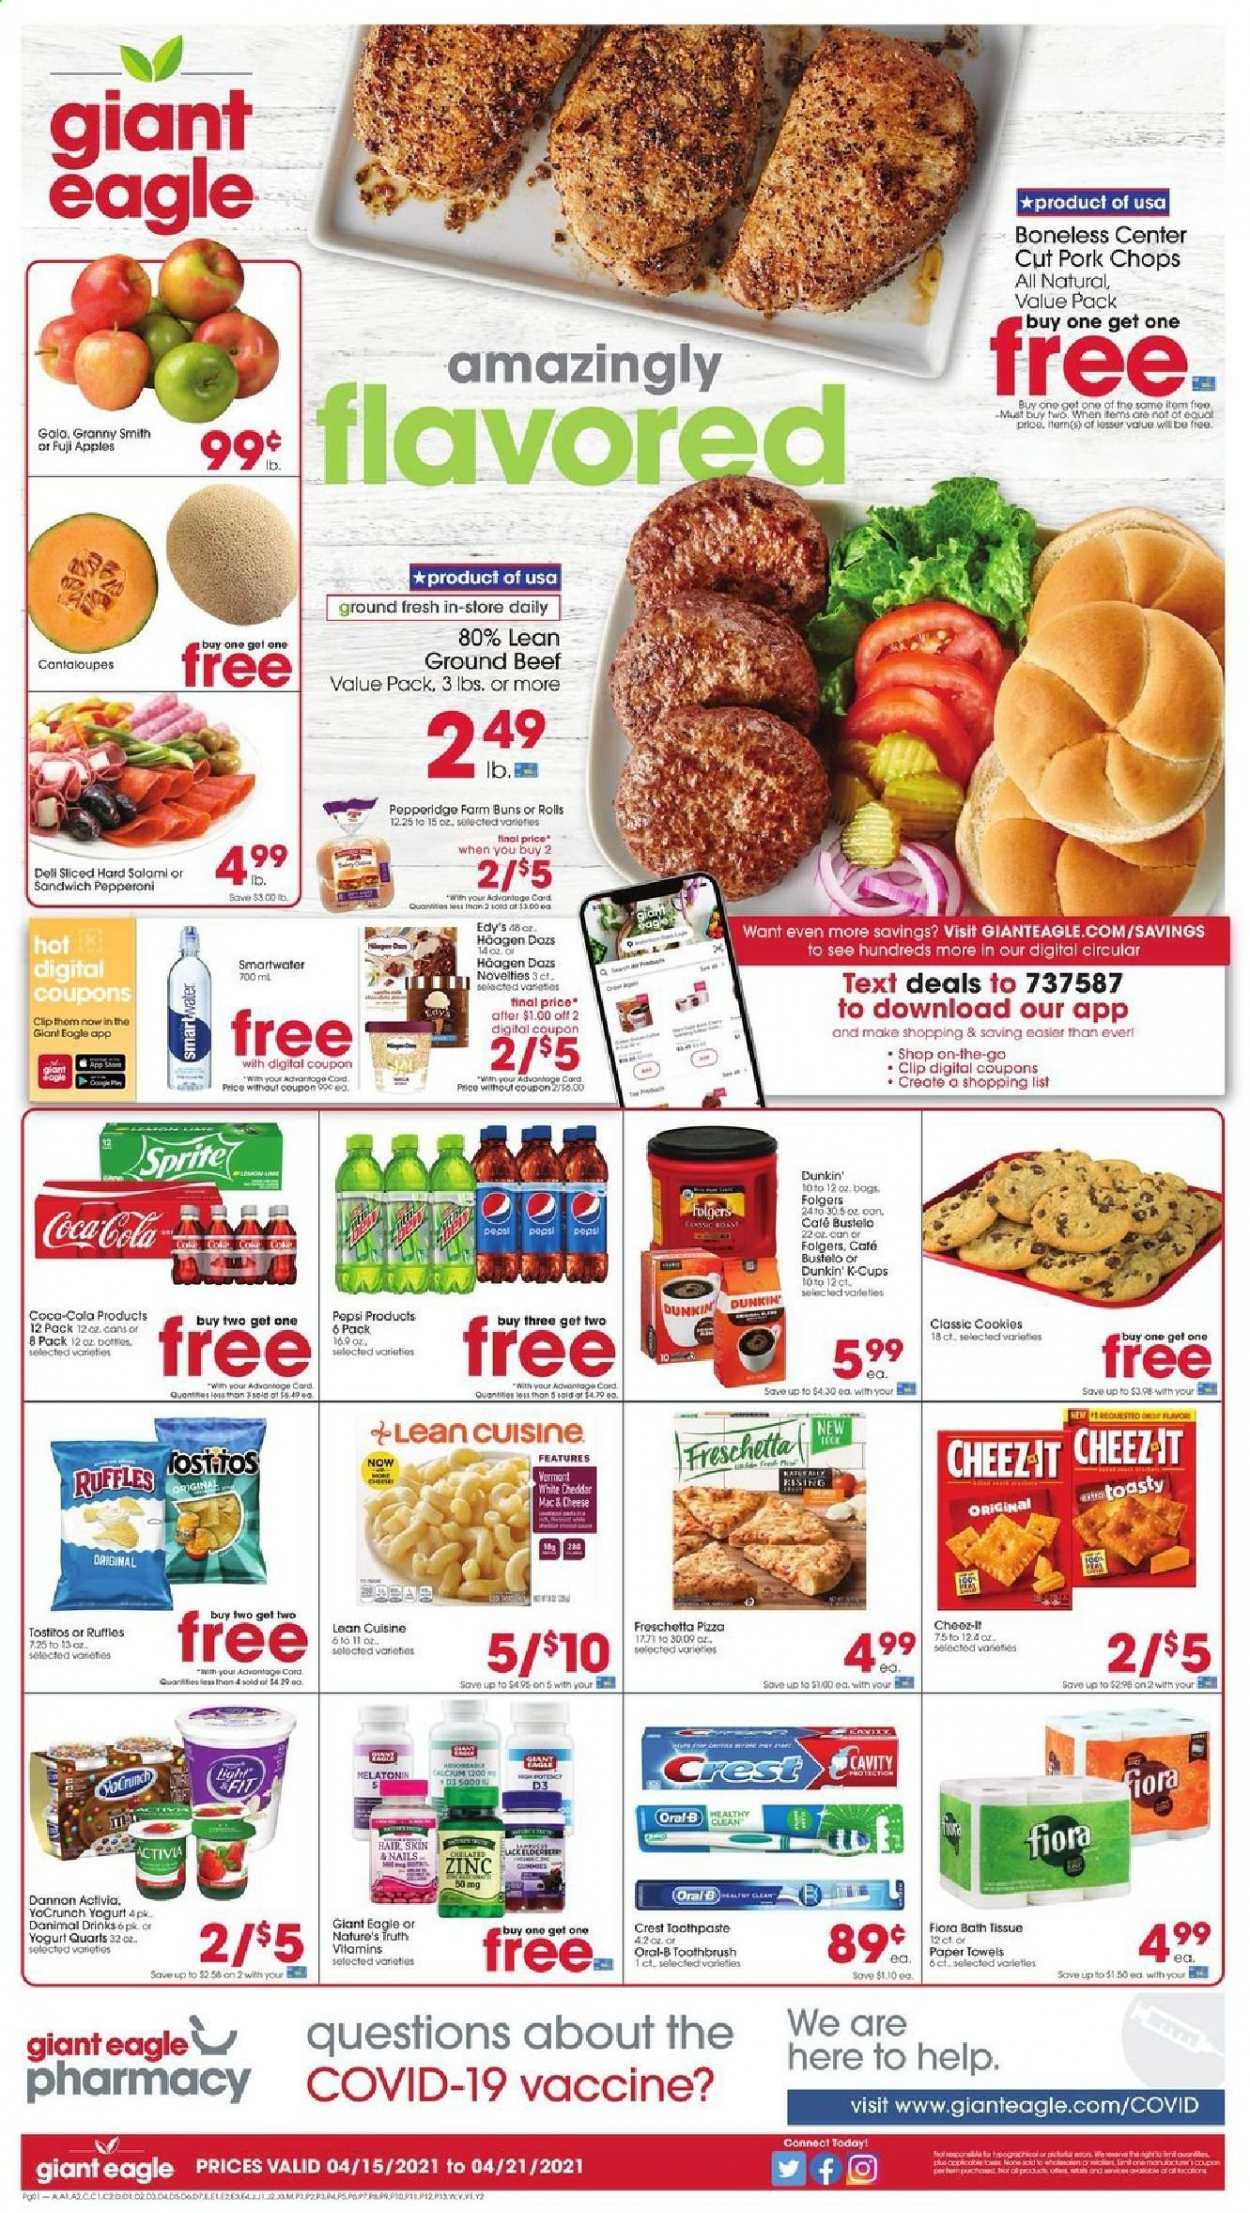 thumbnail - Giant Eagle Flyer - 04/15/2021 - 04/21/2021 - Sales products - buns, cantaloupe, apples, Fuji apple, Granny Smith, cod, sandwich, Lean Cuisine, salami, pepperoni, cheese, yoghurt, Activia, Dannon, Flora, Häagen-Dazs, cookies, Cheez-It, Ruffles, Tostitos, Coca-Cola, Sprite, Pepsi, Folgers, coffee capsules, K-Cups, beef meat, ground beef, pork chops, pork meat, bath tissue, kitchen towels, paper towels, toothbrush, Oral-B, toothpaste, Crest, Melatonin, Nature's Truth, zinc. Page 1.